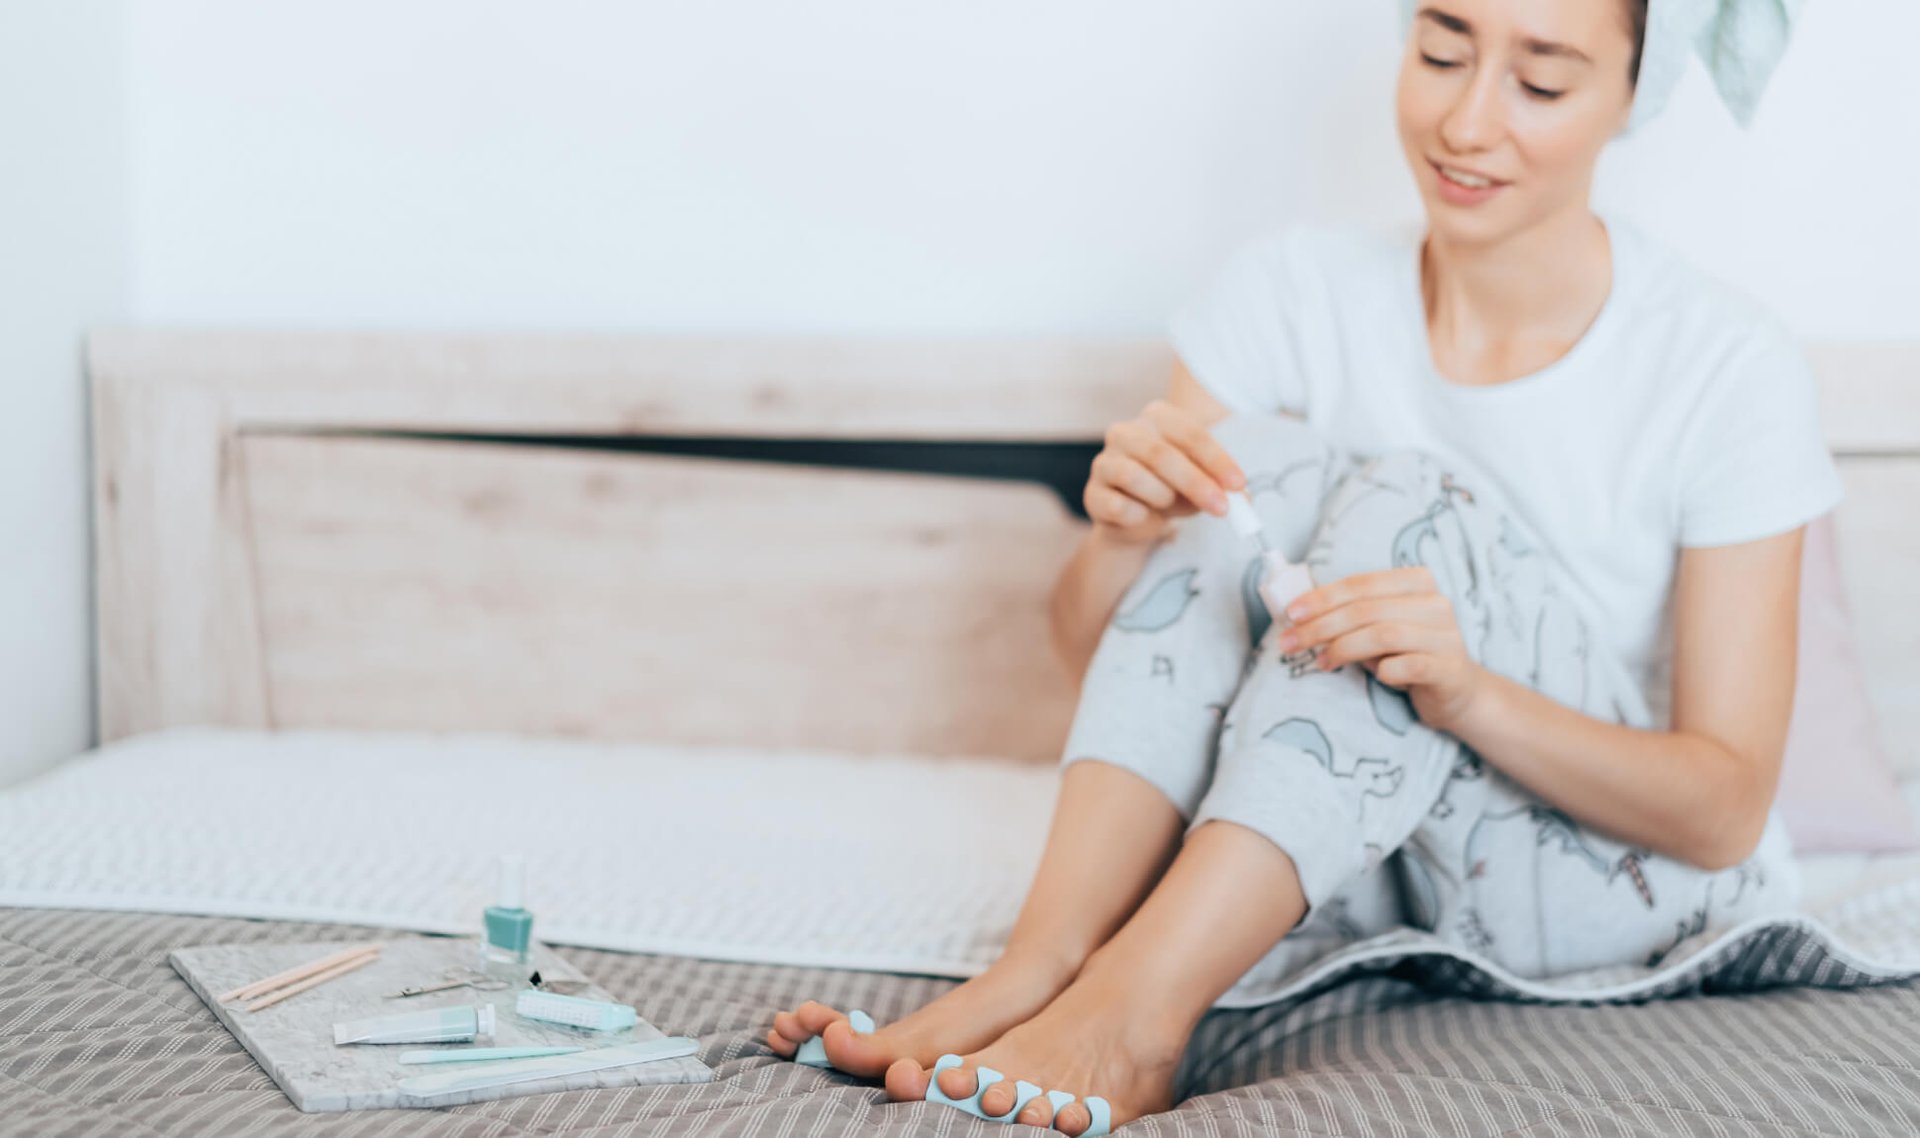 How to DIY a Pedicure in Five Steps